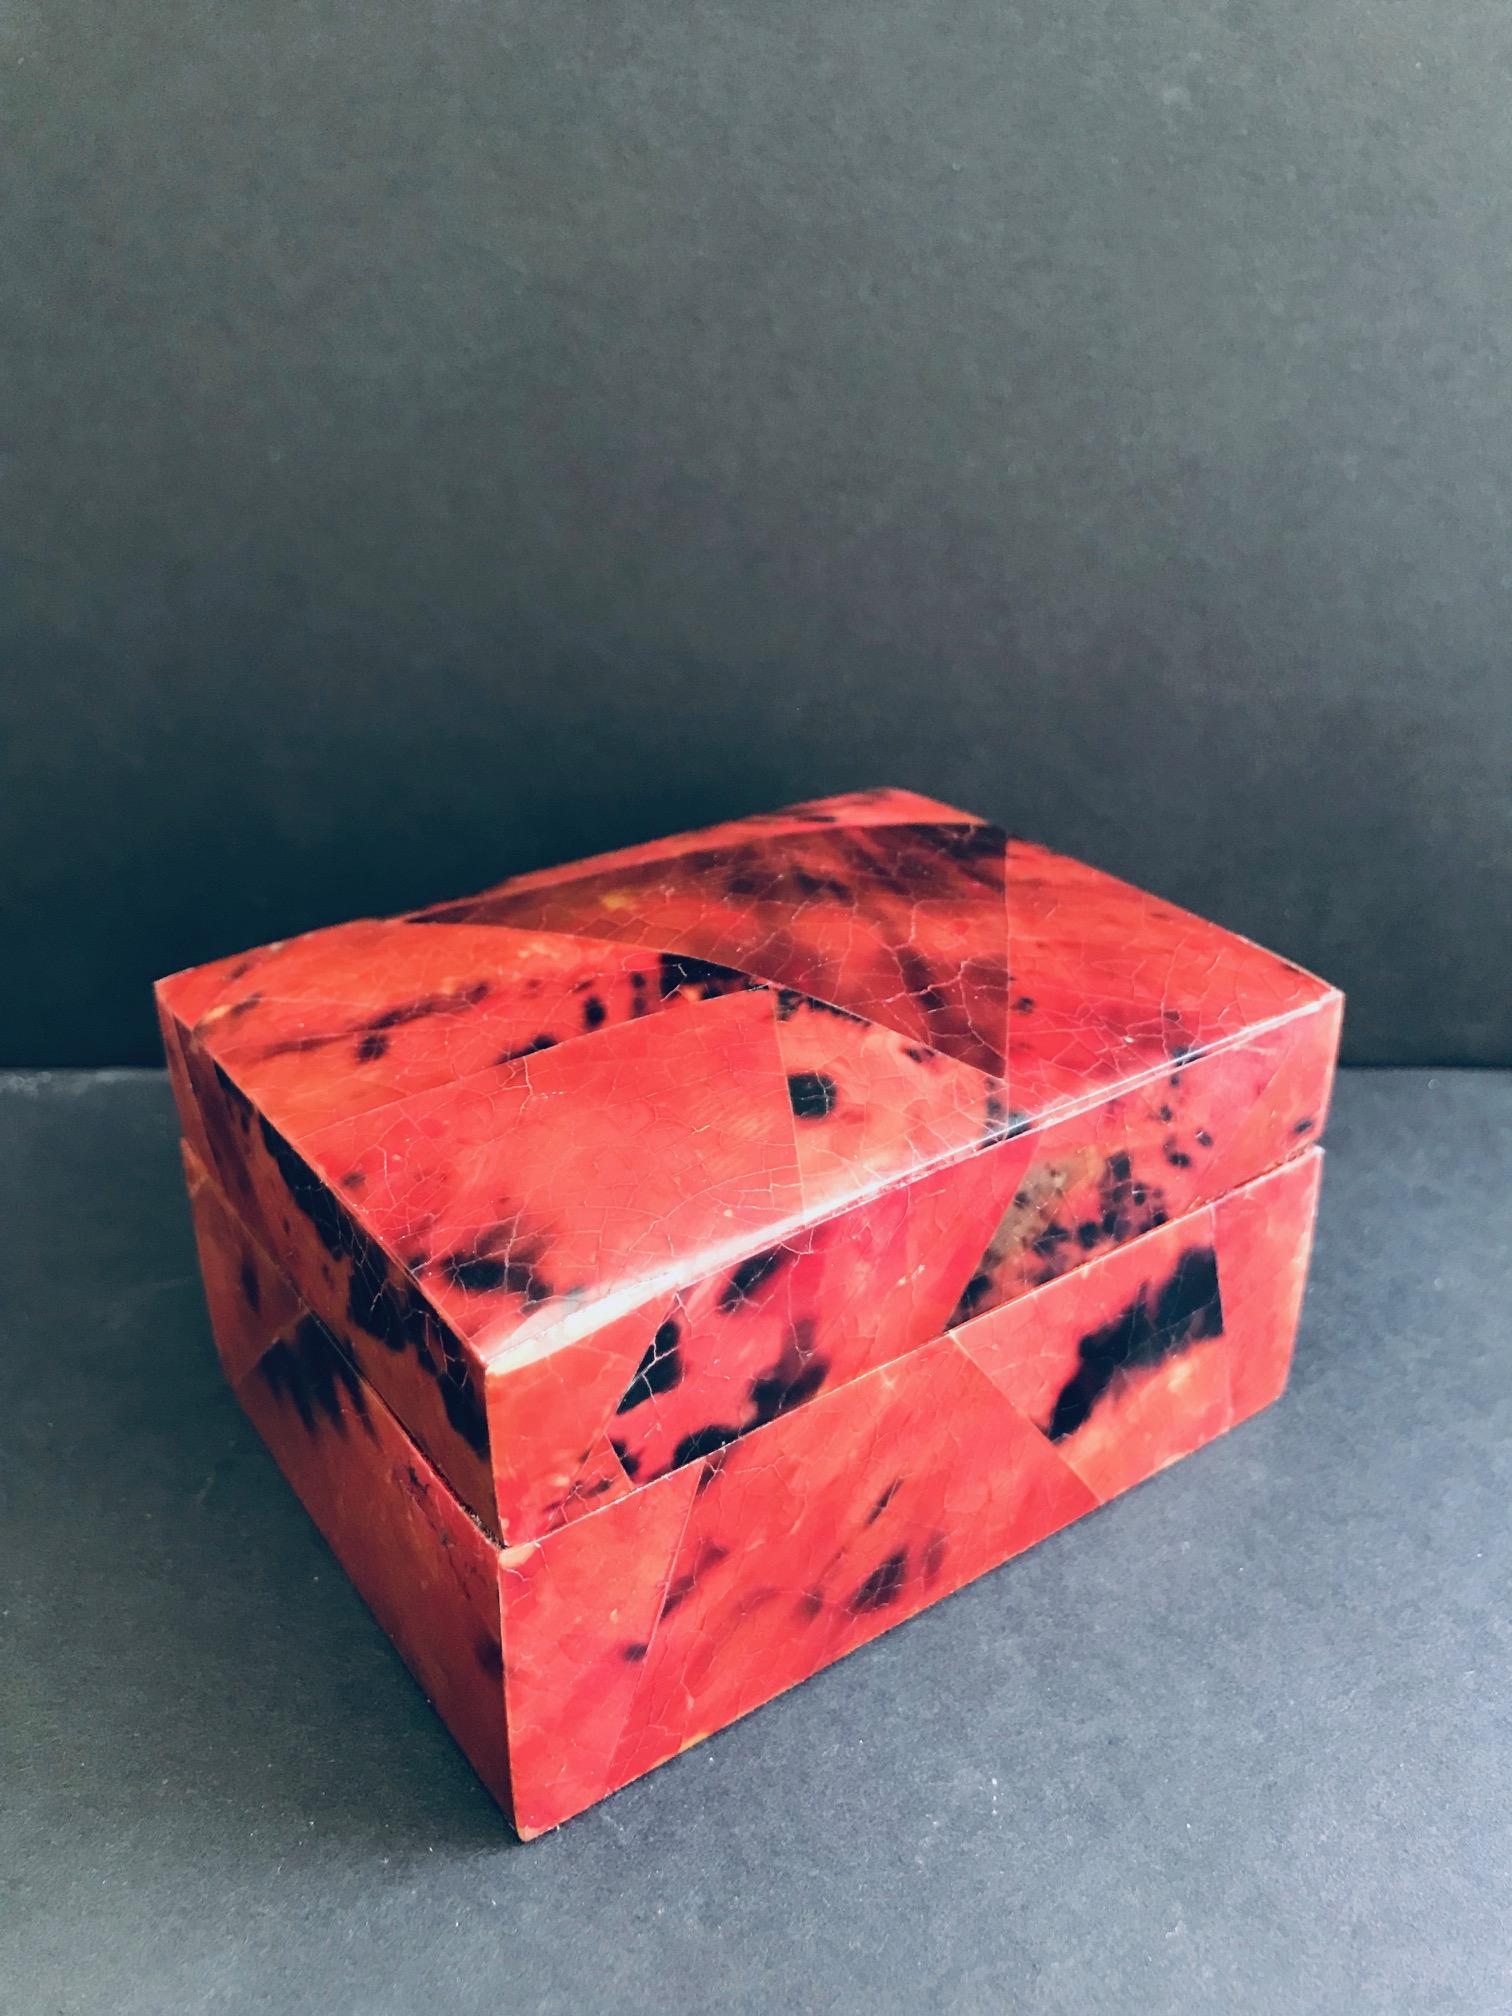 Gorgeous decorative box or jewelry box in tessellated pen-shell. Lacquered and hand-dyed in red and black with mosaic inlays throughout. Lidded Box features palmwood interior and has R&Y Augousti signature on the underside. Other matching